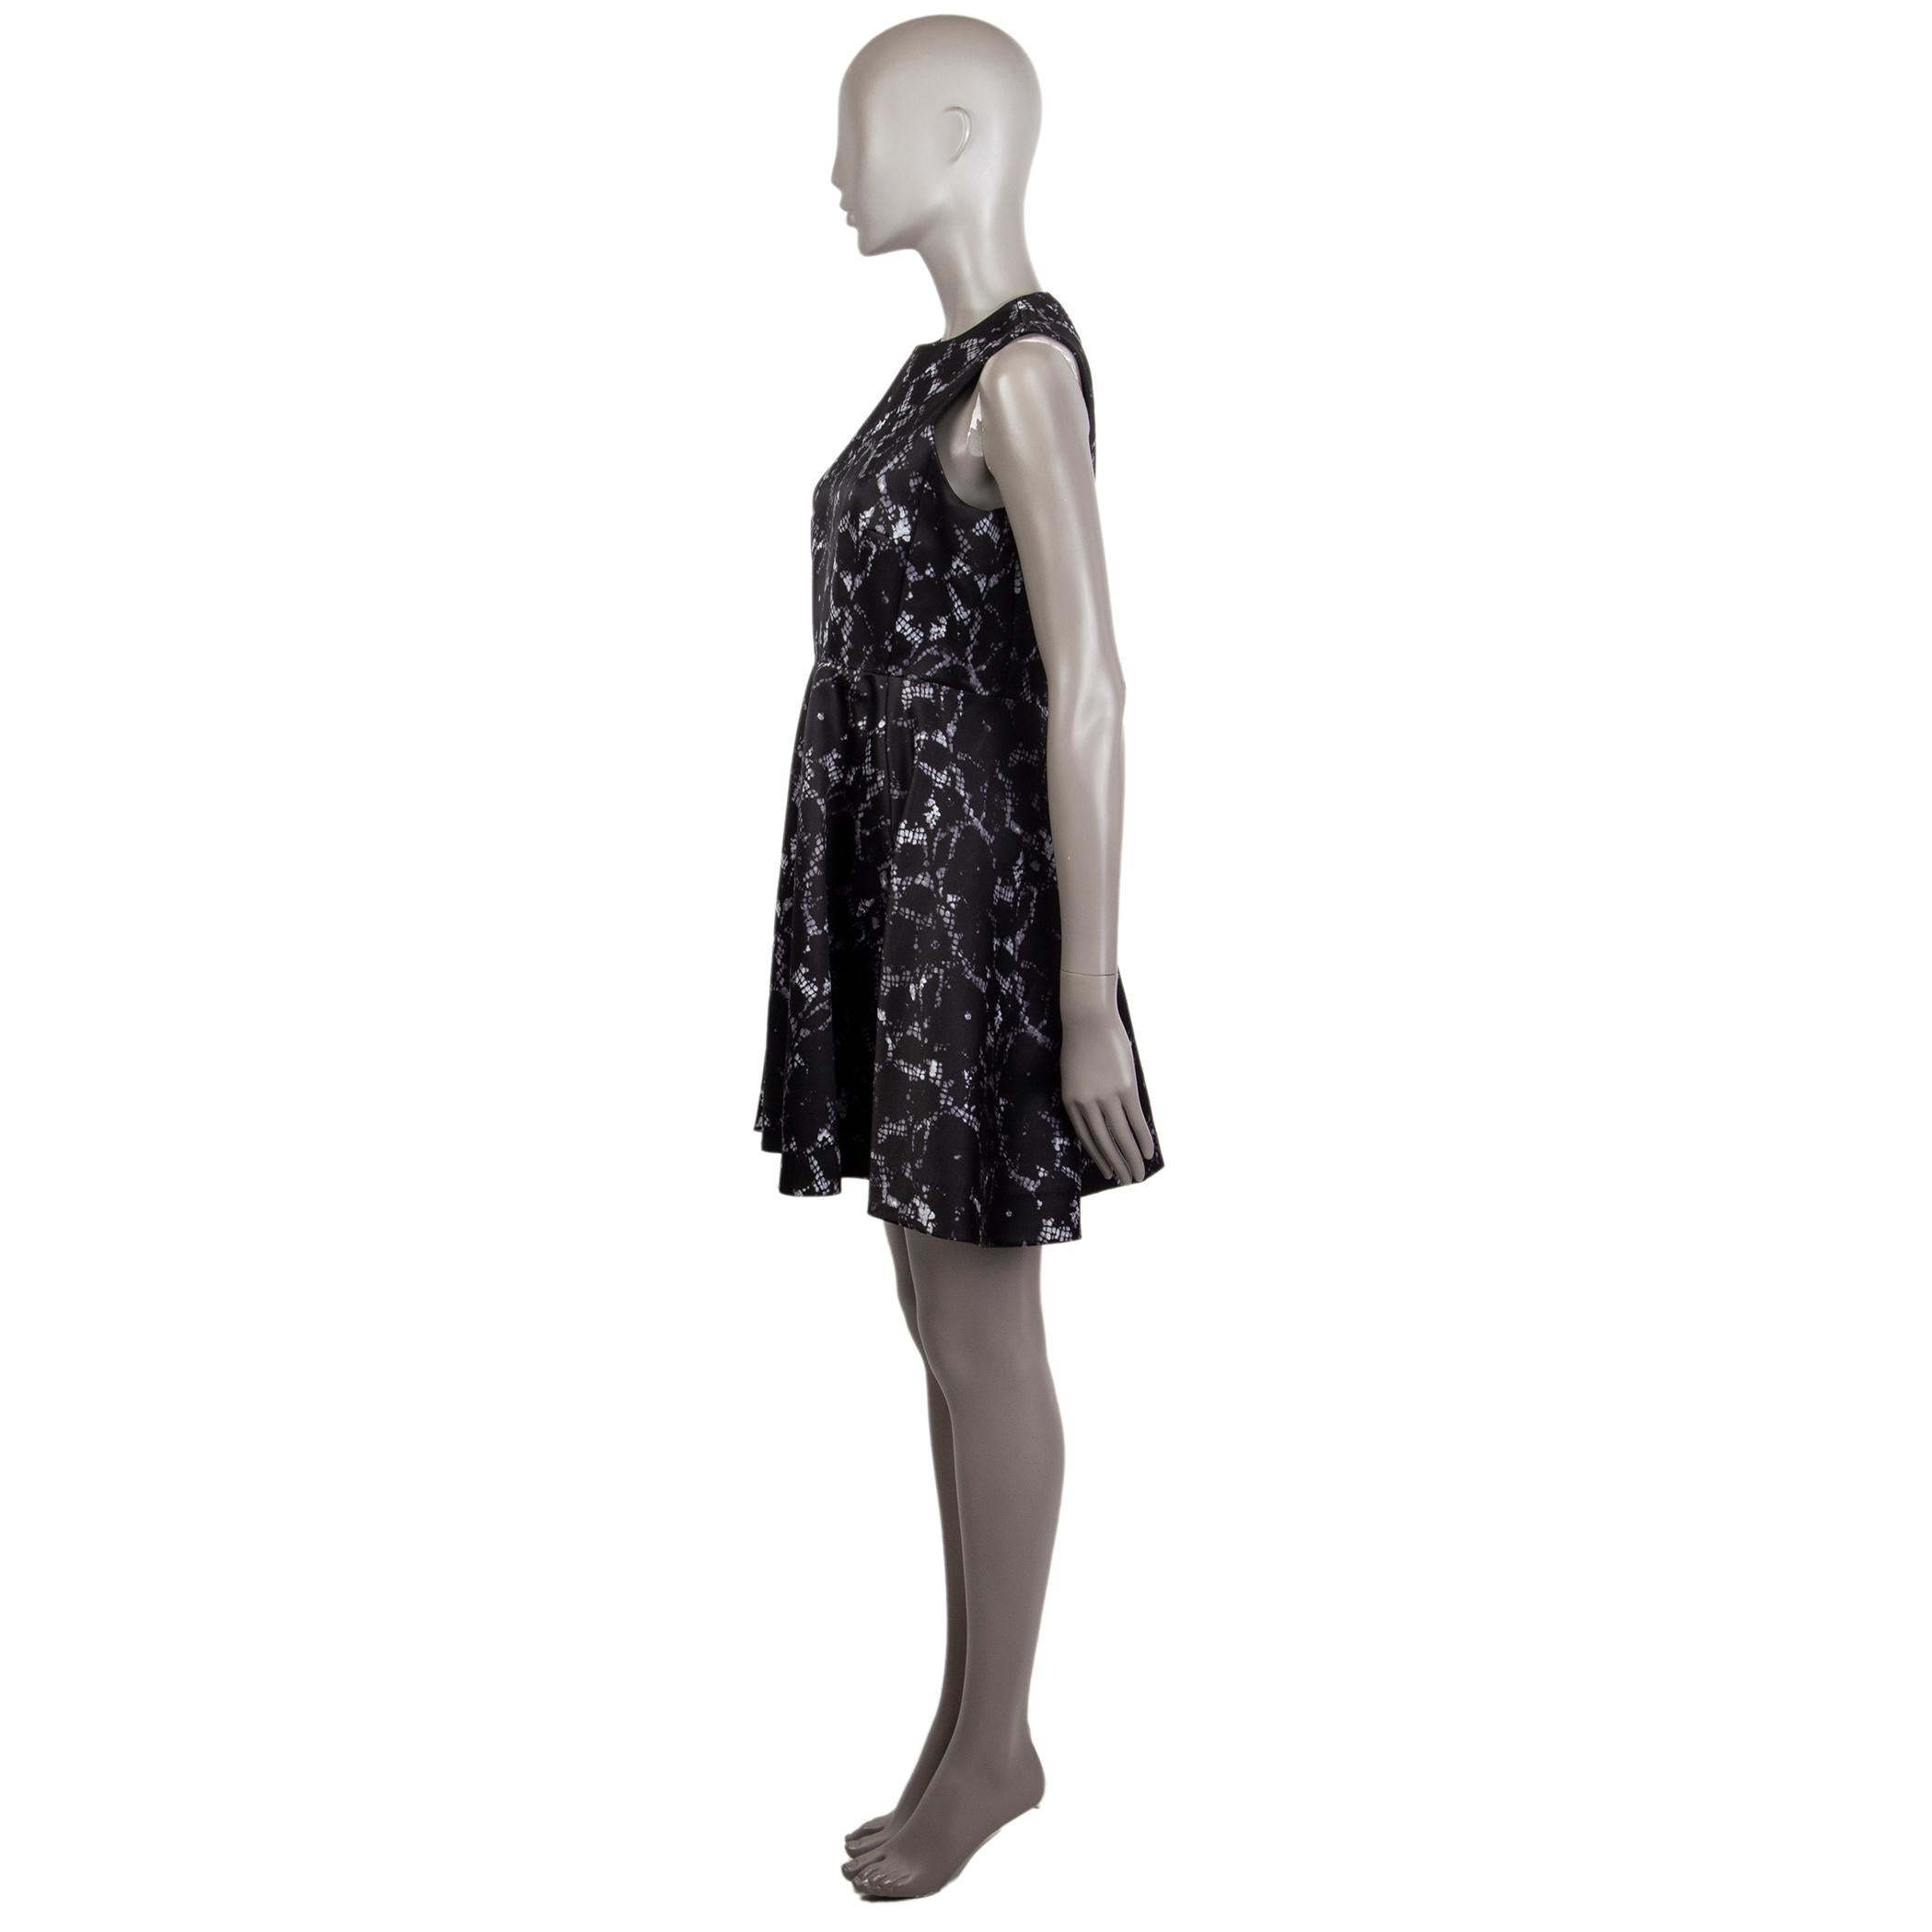 Louis Vuitton sleeveless snake-print flared dress in black, grey and white silk (100%) with a round neck. Closes on the back with a concealed zipper. Has two front slit pockets. Unlined. Has been worn and is in excellent condition. 

Tag Size